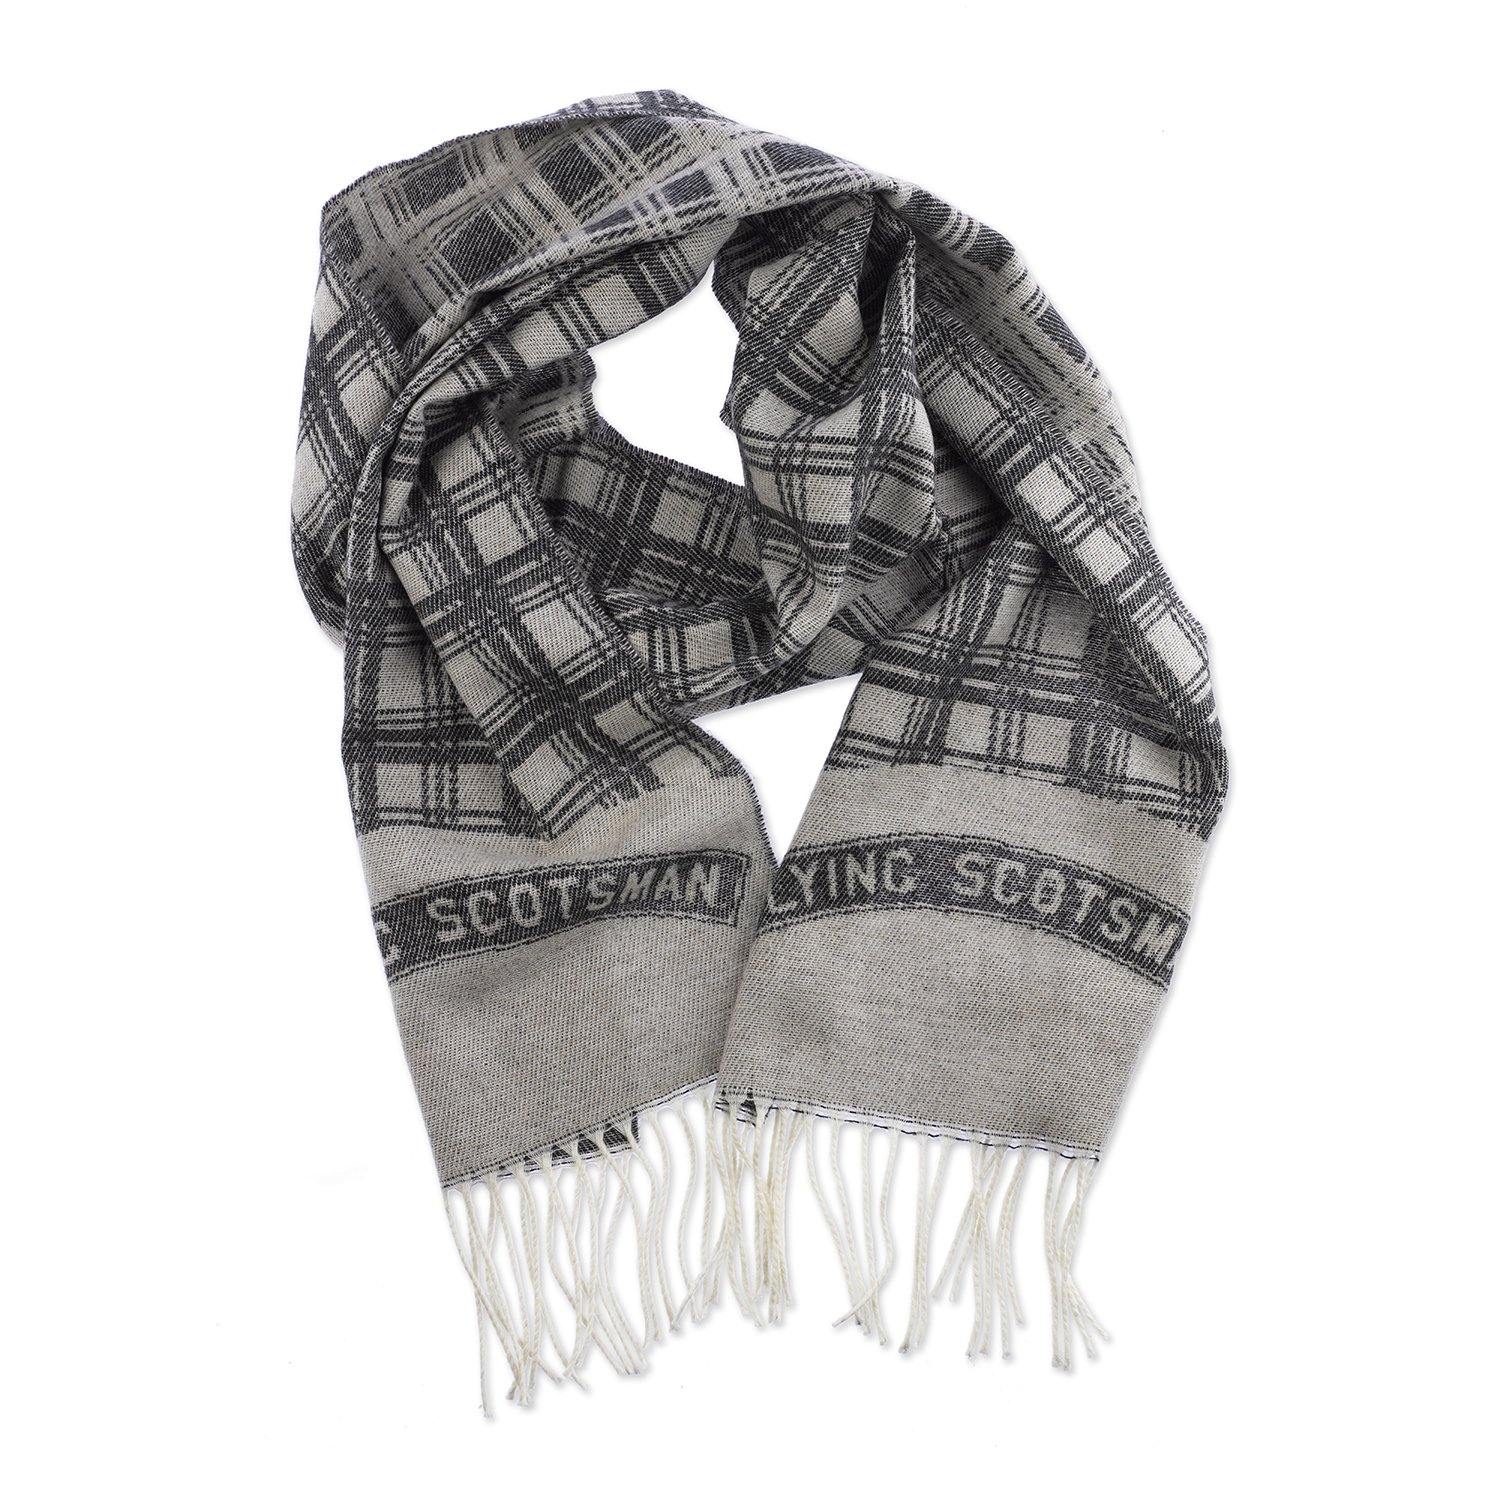 Flying Scotsman Cashmere Scarf2